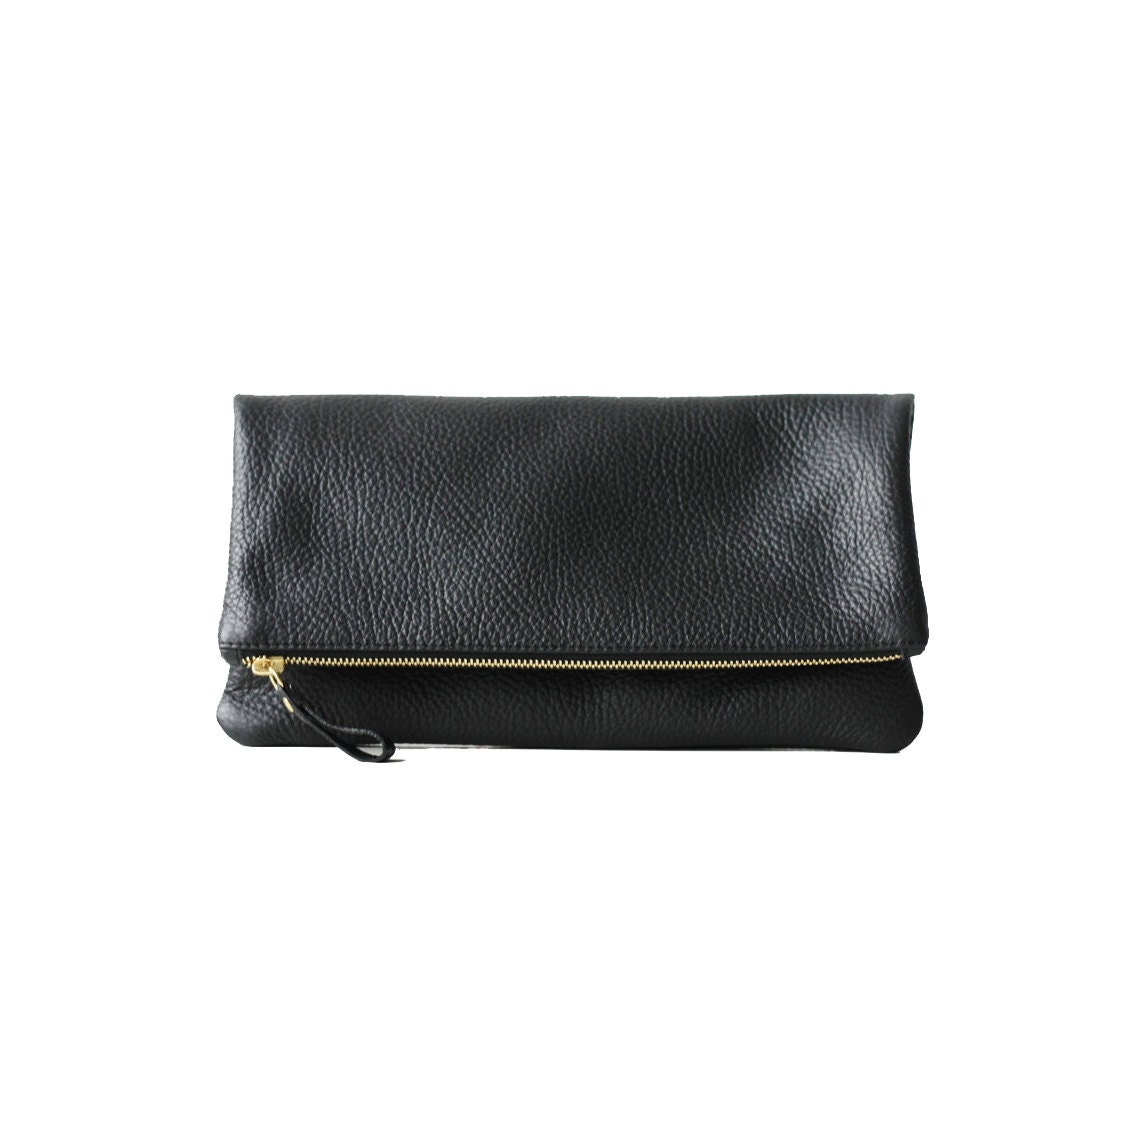 Black Leather Foldover Clutch with Linen Lining by MISHKAbags